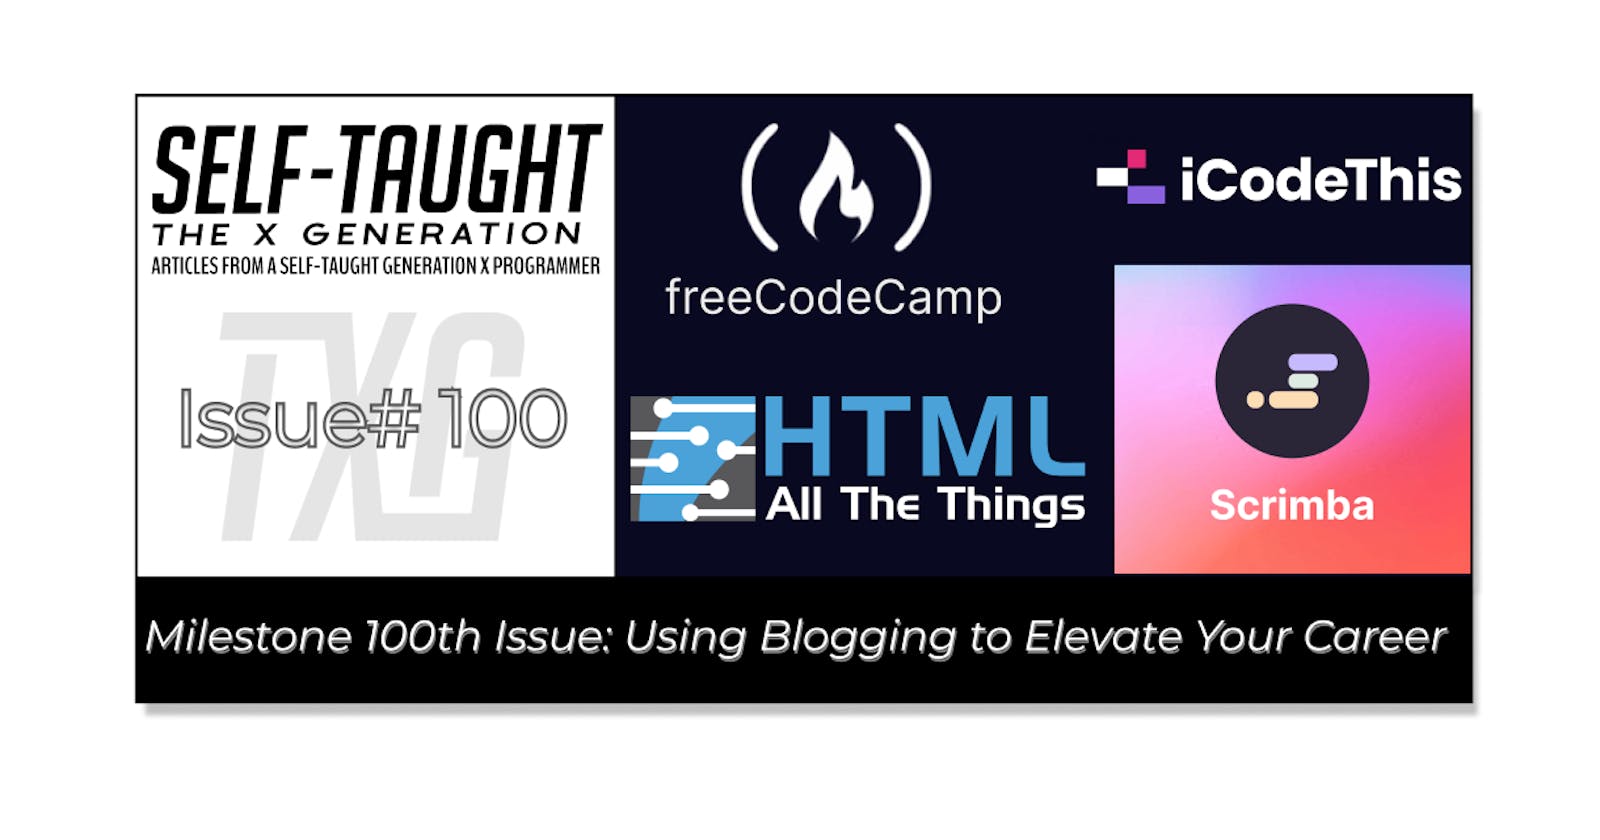 Milestone 100th Issue: Using Blogging to Elevate Your Career